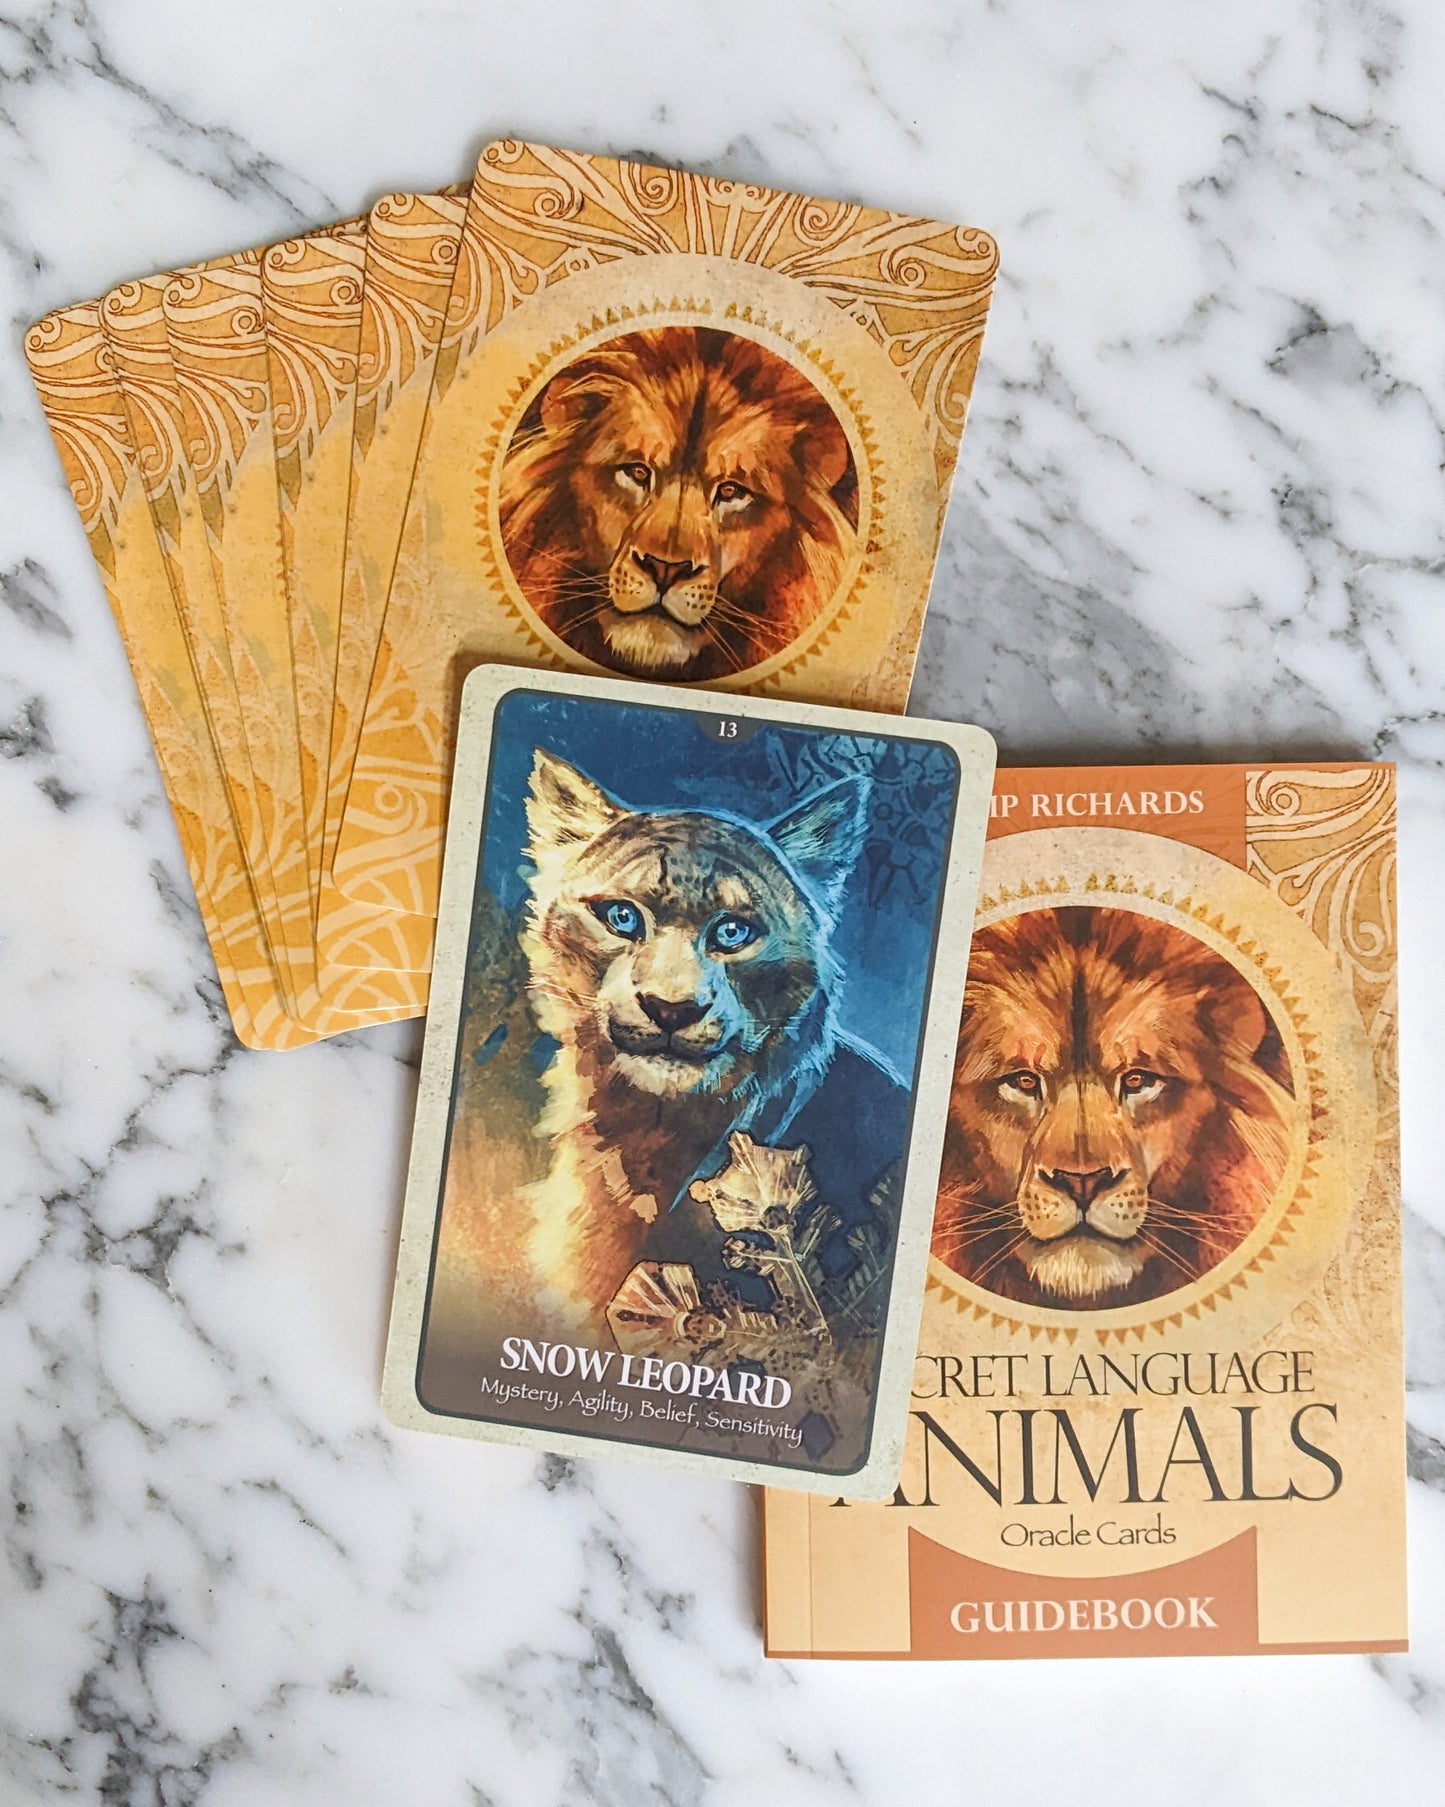 The Secret Language of Animals Oracle Cards